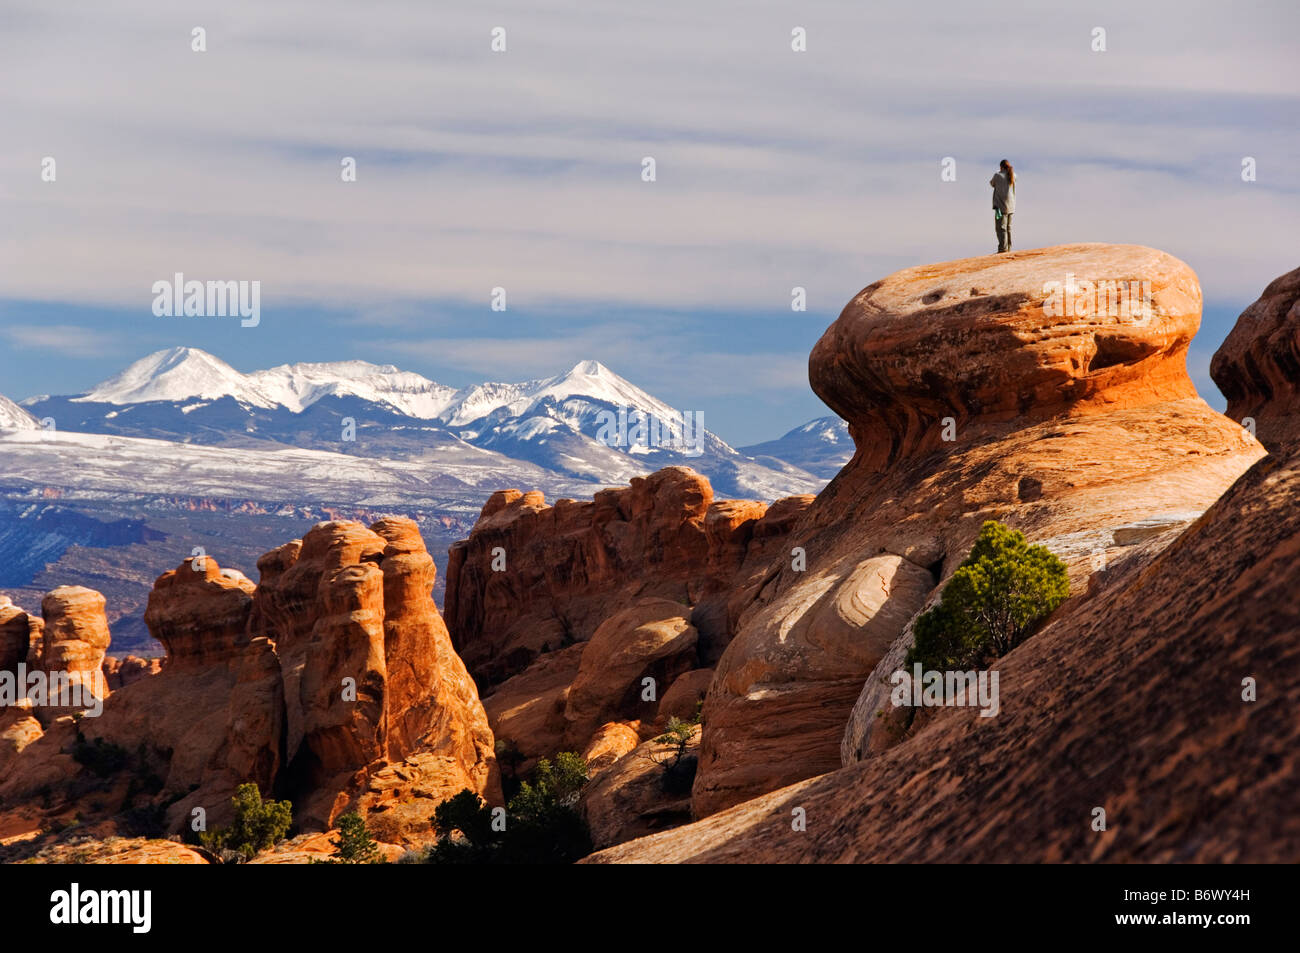 USA, Utah, Arches National Park. Manti La Sal National Forest mountains and the sandstone pinnacles at the Devils Garden Stock Photo